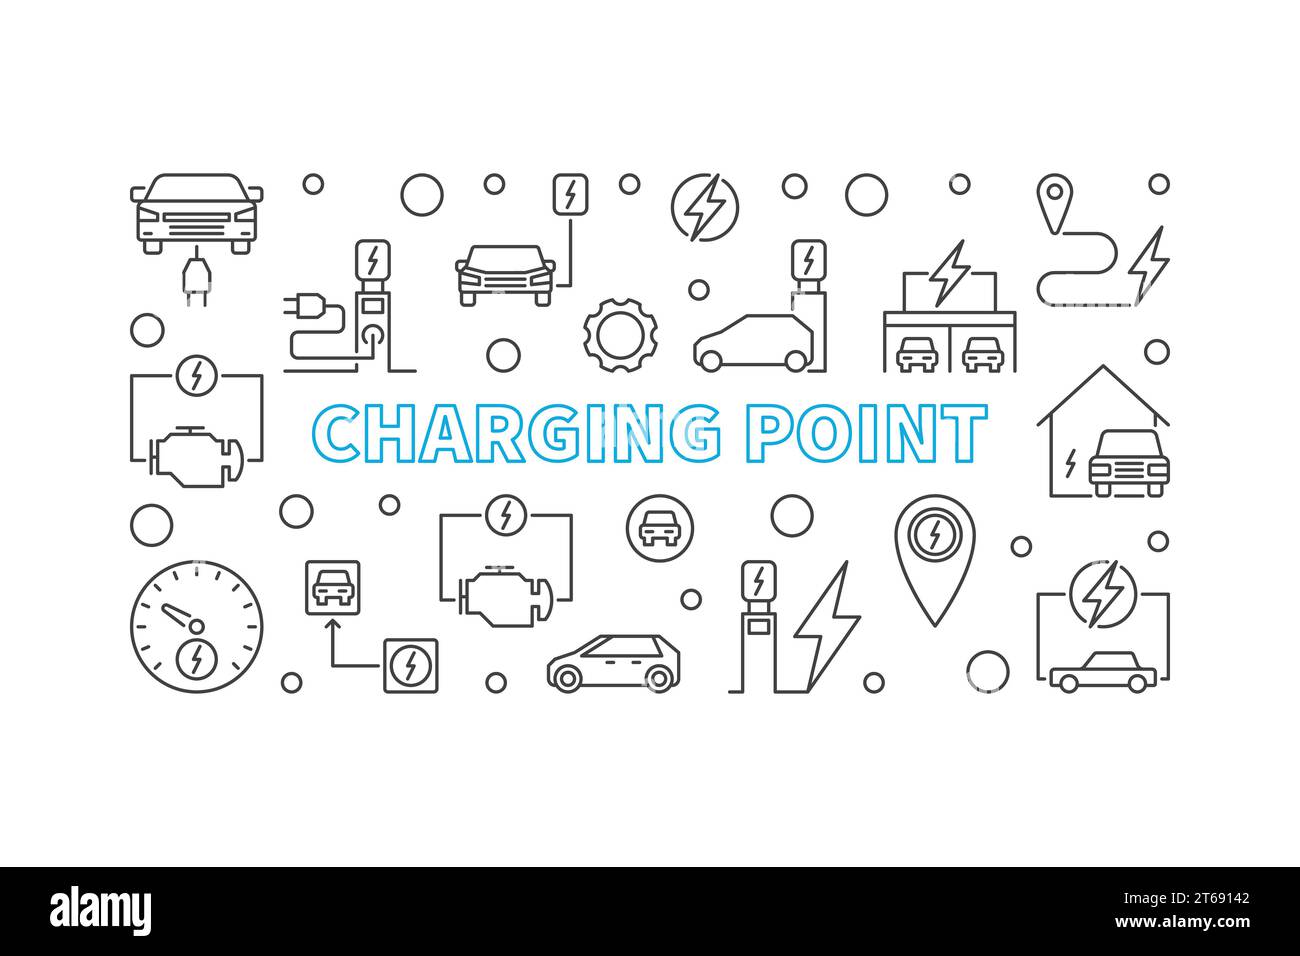 Charging point simple illustration in thin line style. Vector EV charge point concept horizontal banner Stock Vector